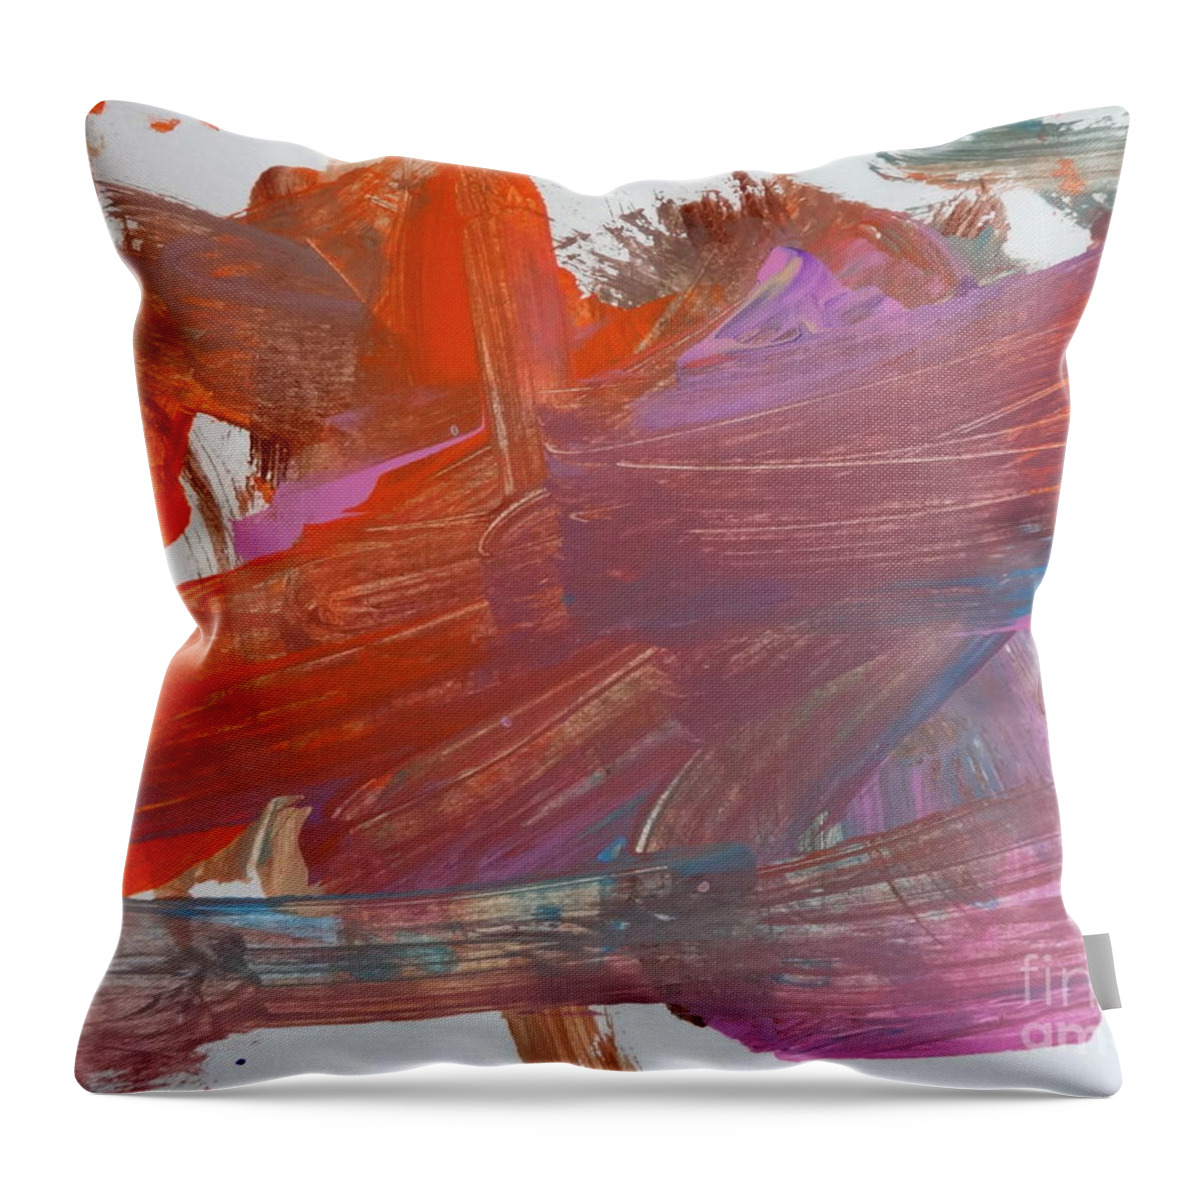 Original Throw Pillow featuring the painting Orange by Emma by Fred Wilson